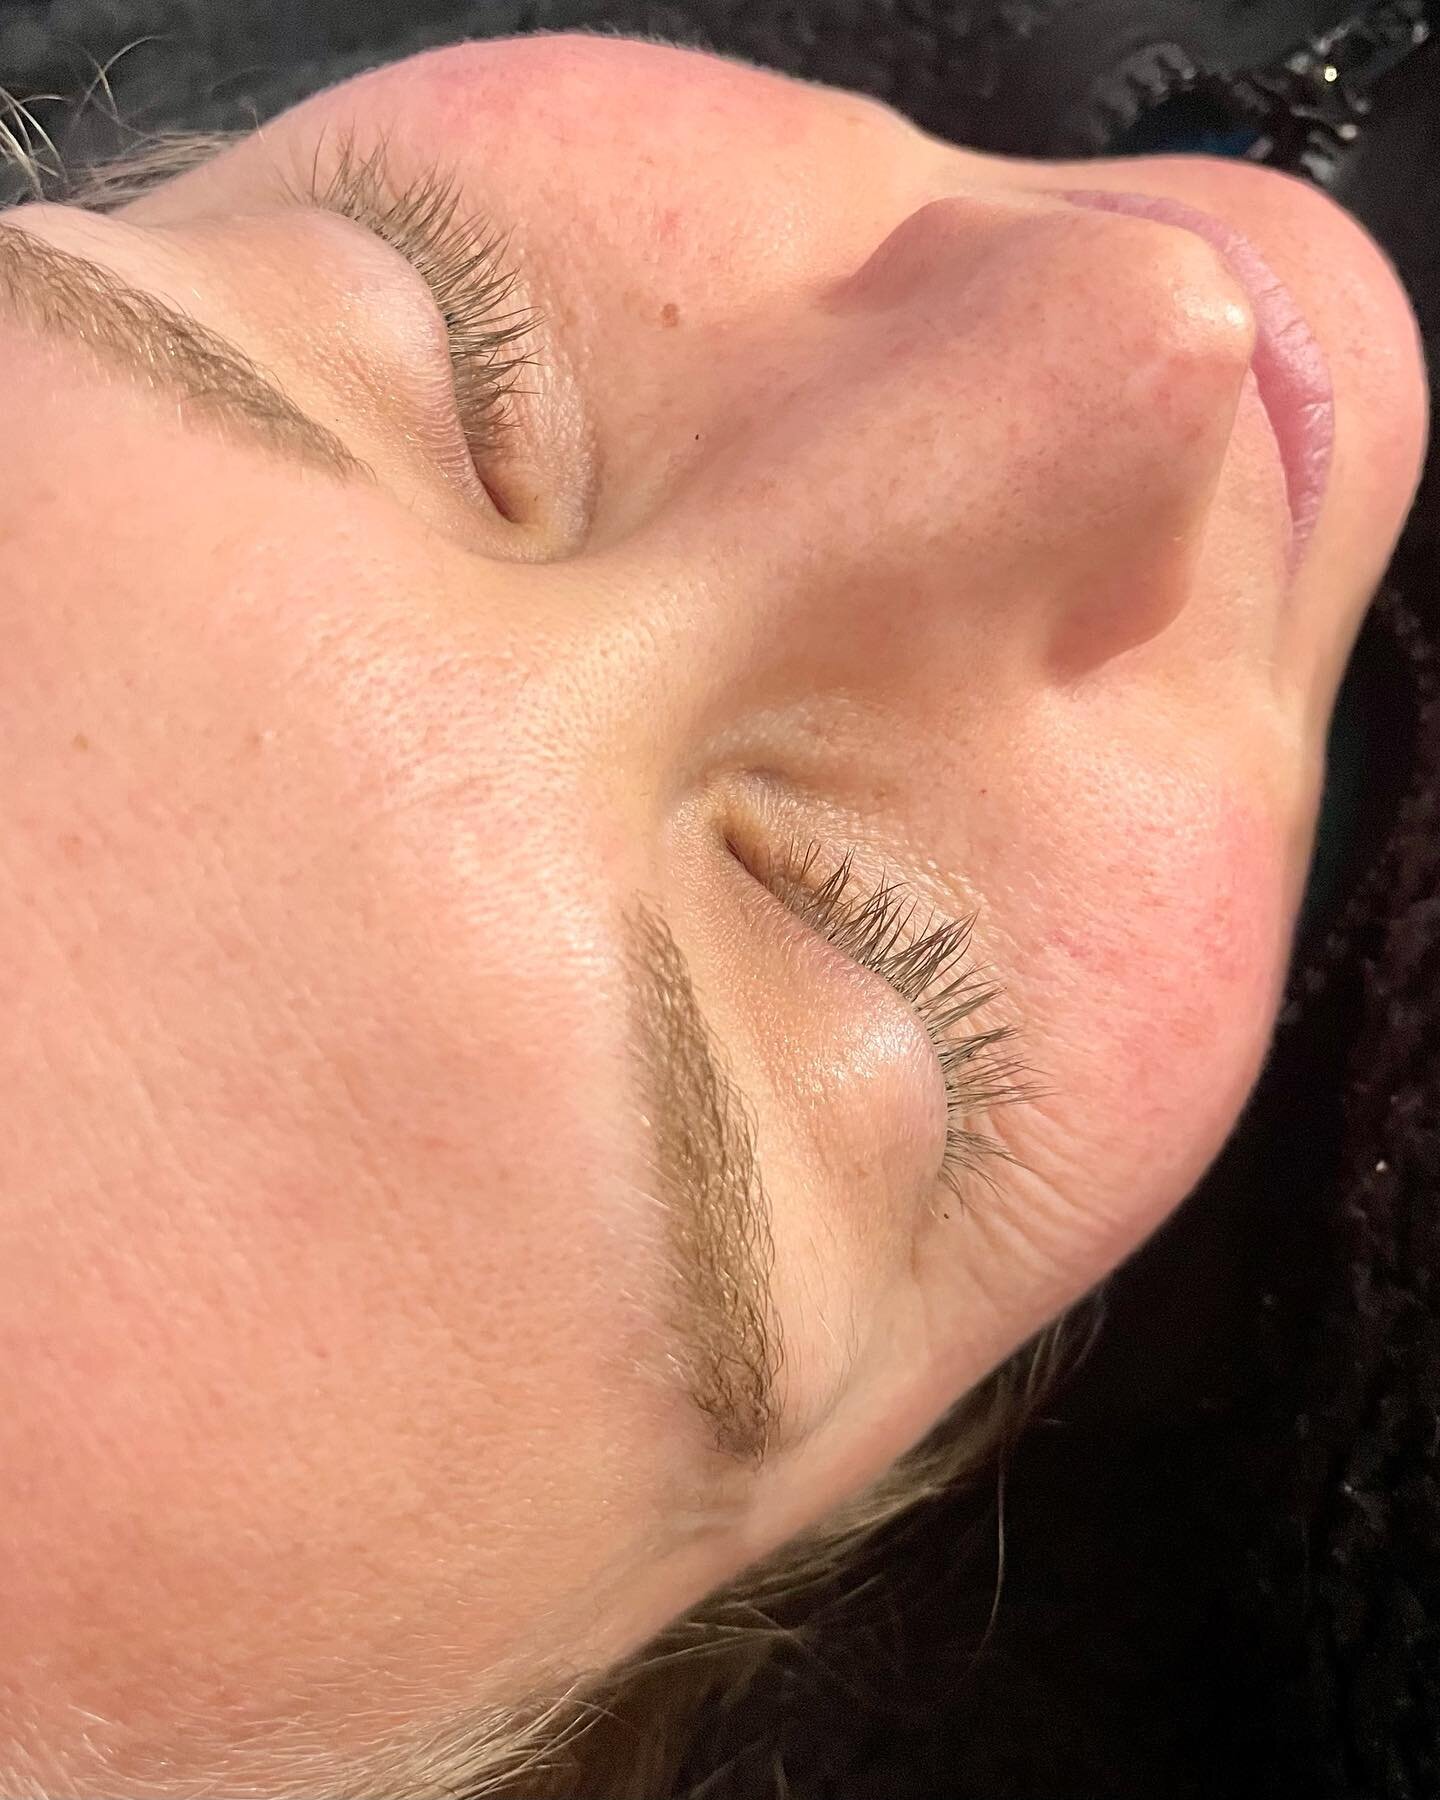 Eye Lash Tint&hellip;.. &euro;15

This is a perfect way to open up your eyes and make you look and feel more awake. Love those no makeup days winter or summer. 
*
*
*
#eyelashtinting #elt #naturalbeauty #bigeyes #lovebeauty #lovemorzine #mountaingirl